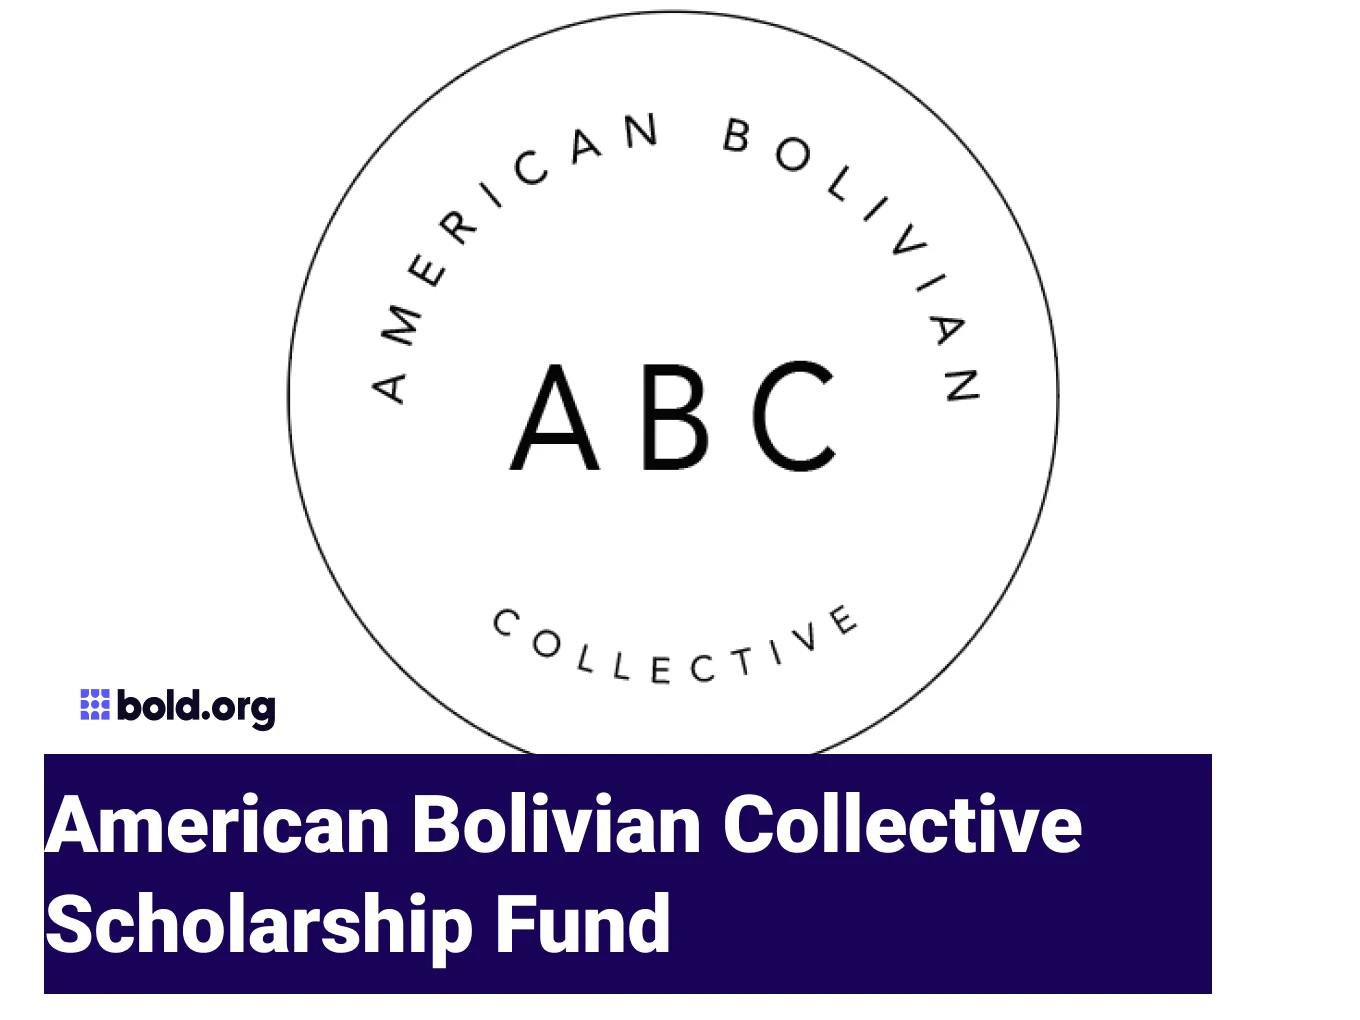 American Bolivian Collective Scholarship Fund